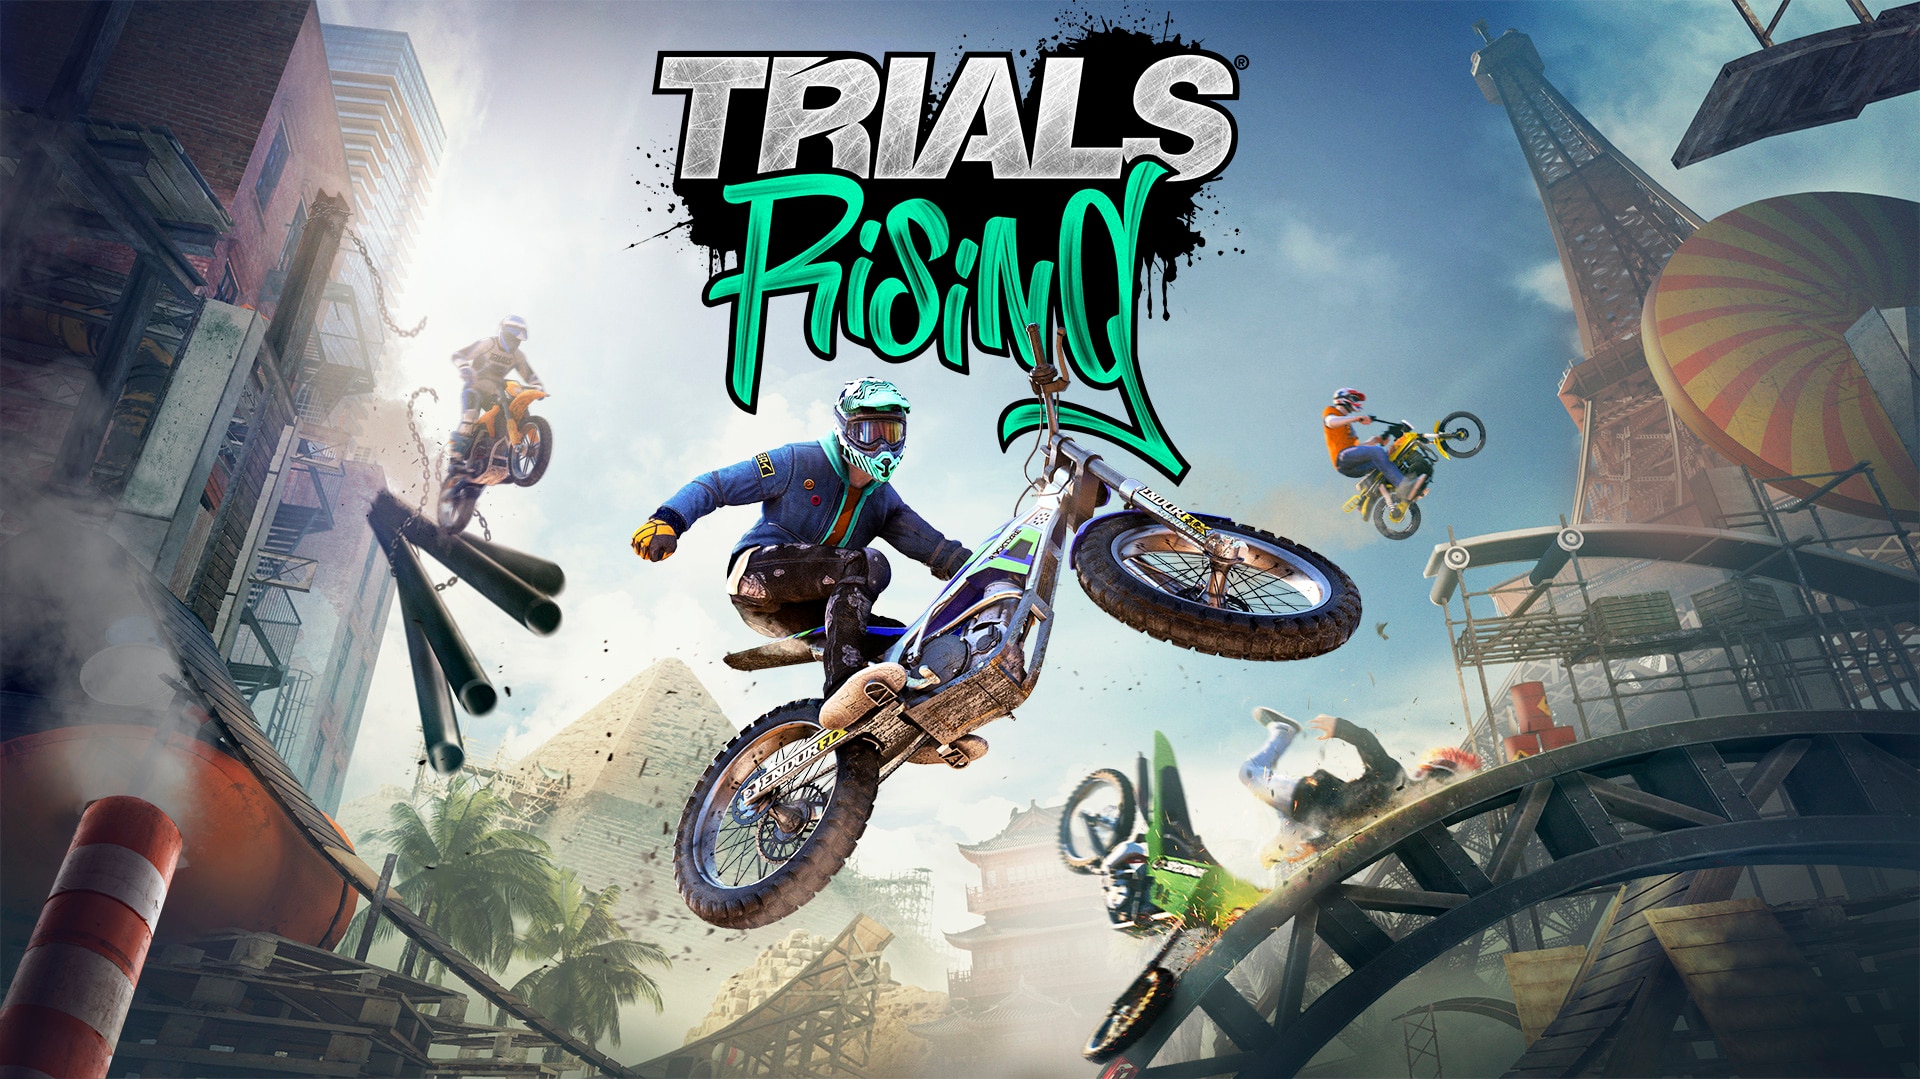 Trial video game downloads